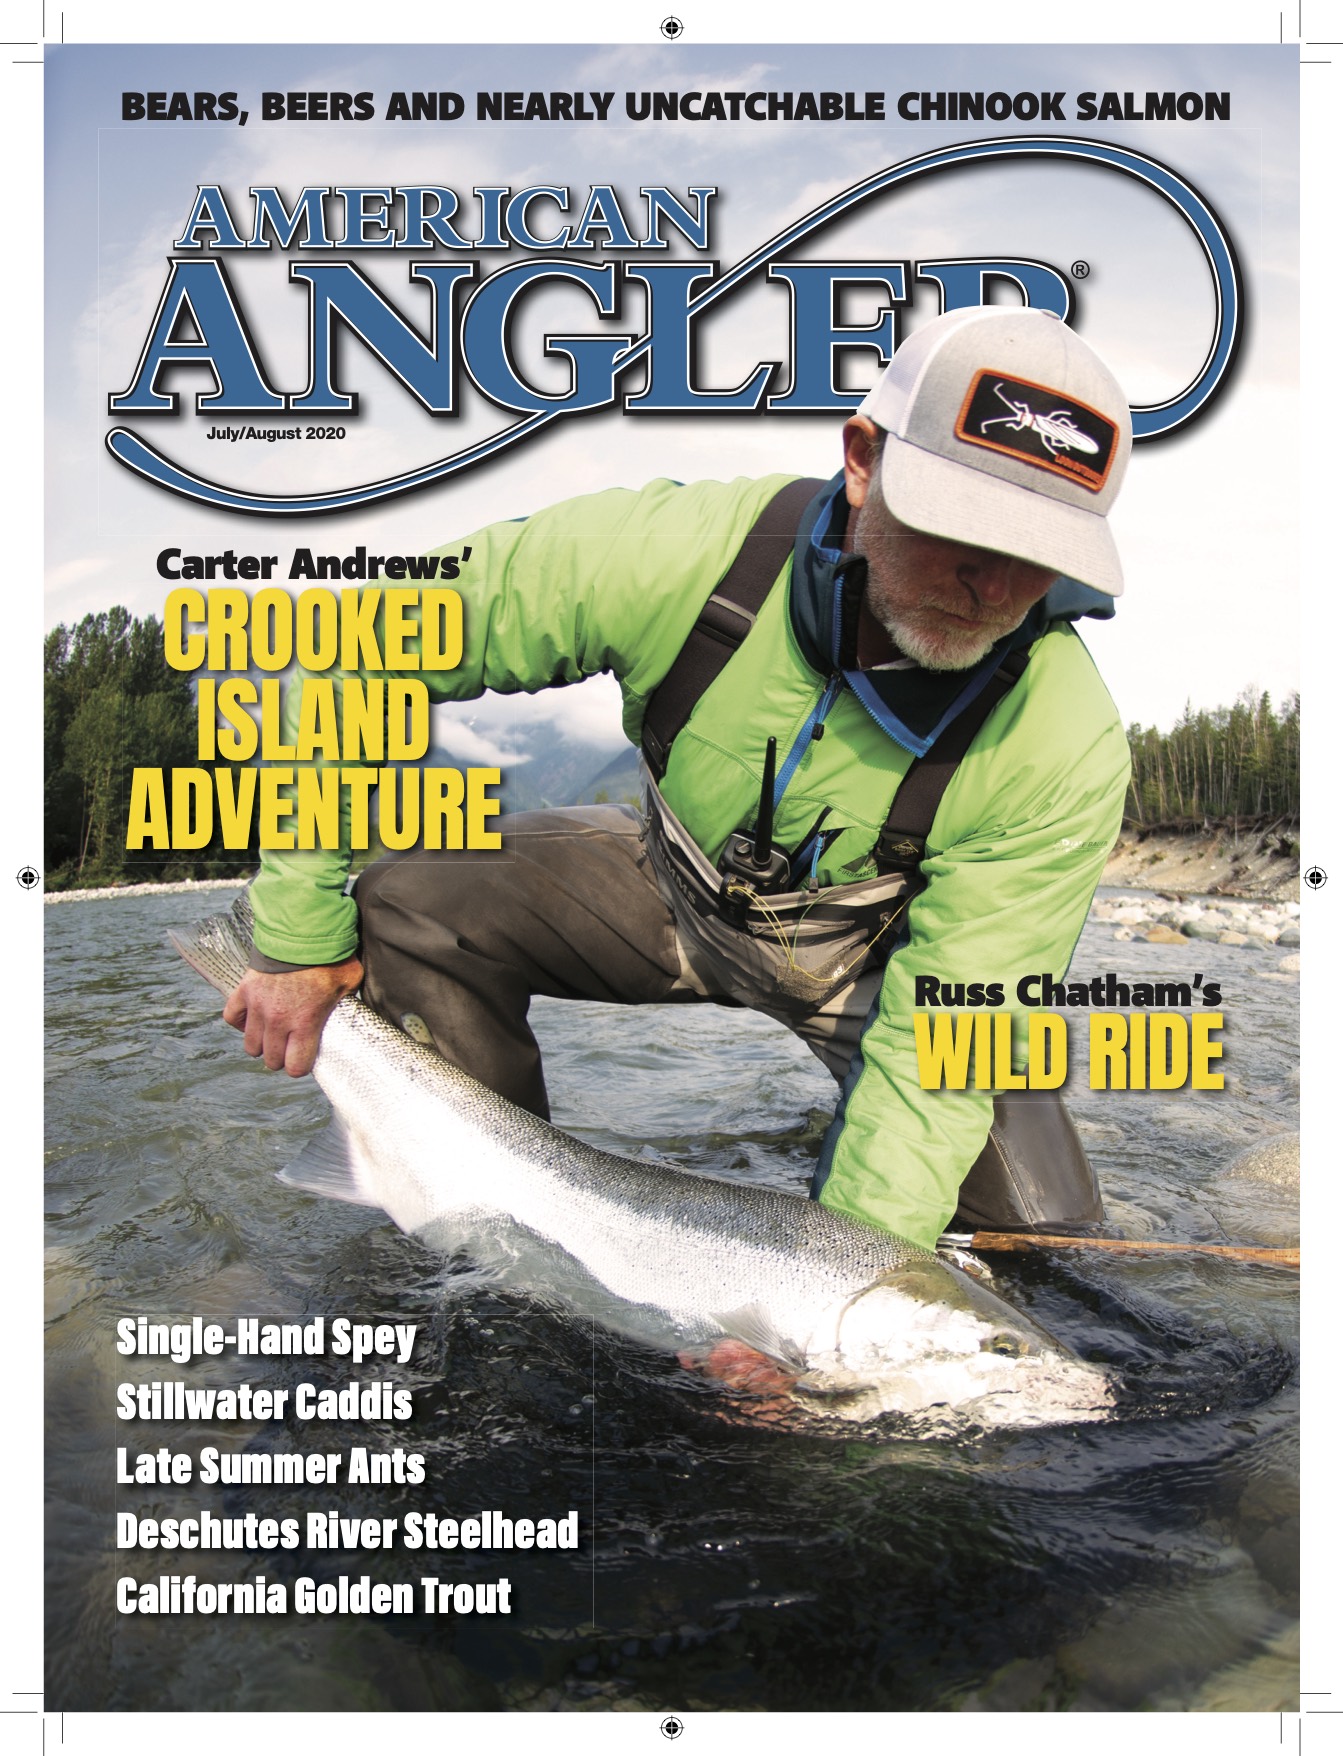 Current Issue of In-Fisherman Magazine